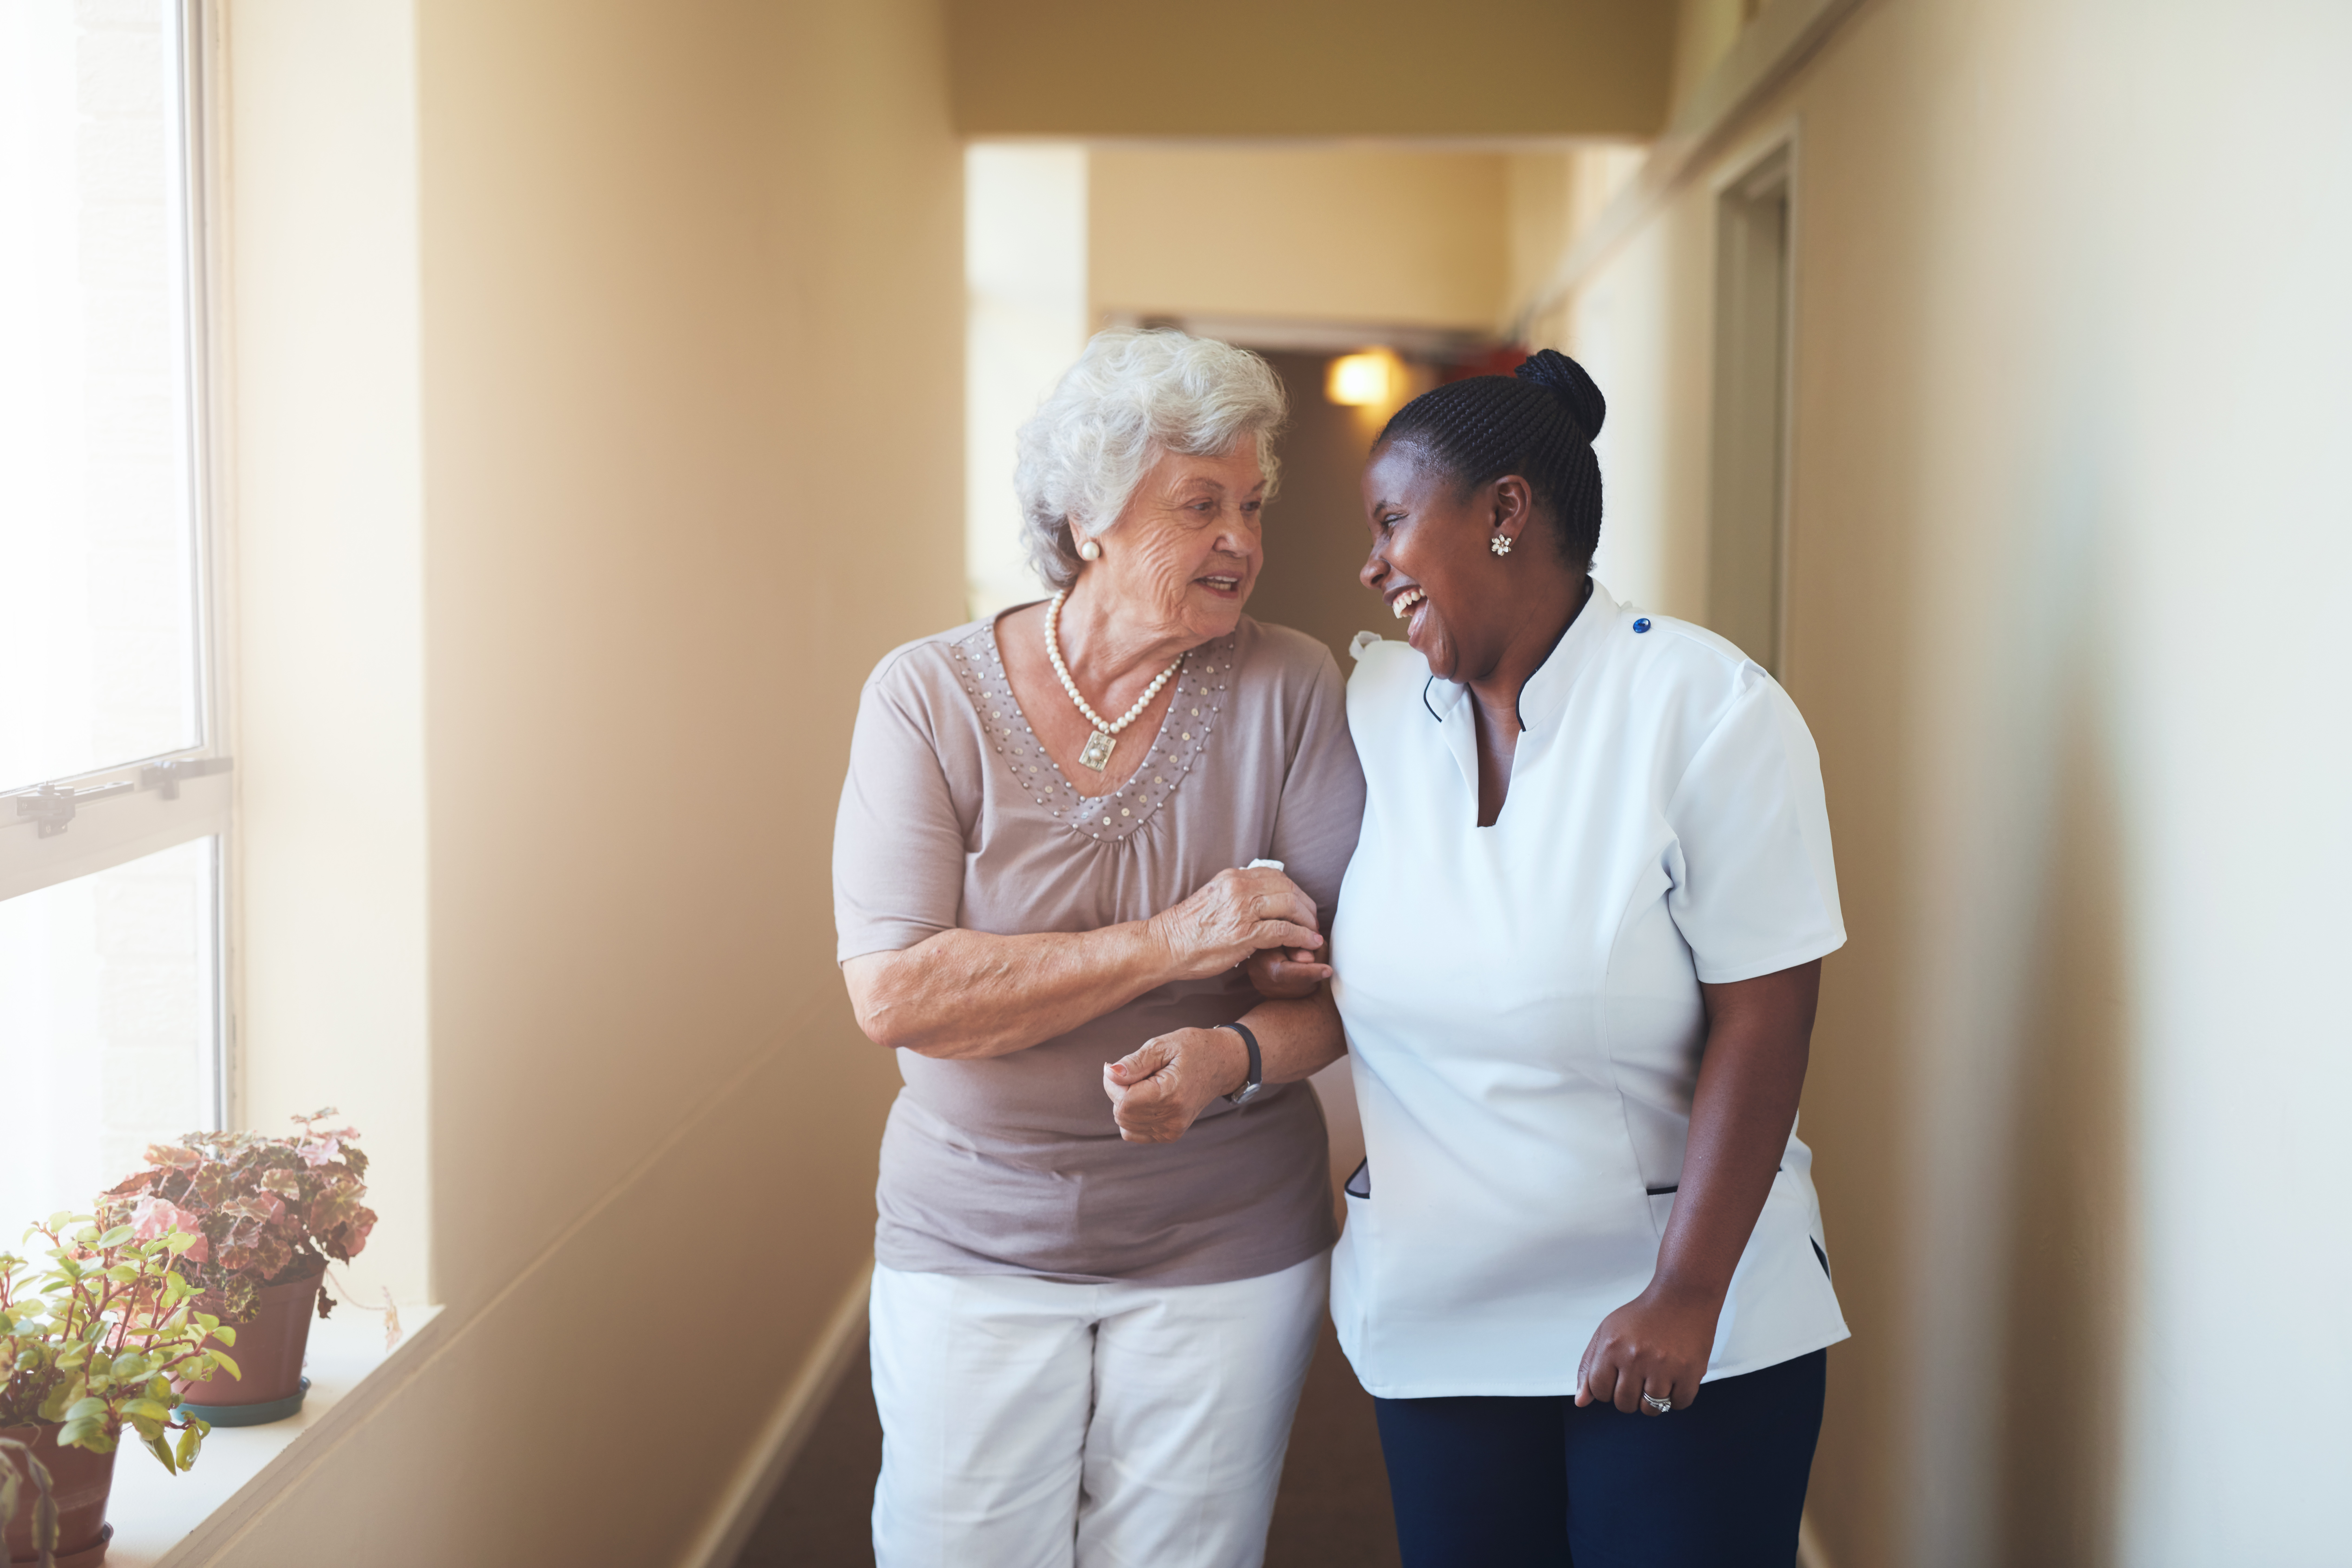 A nurse with a senior woman laughing together